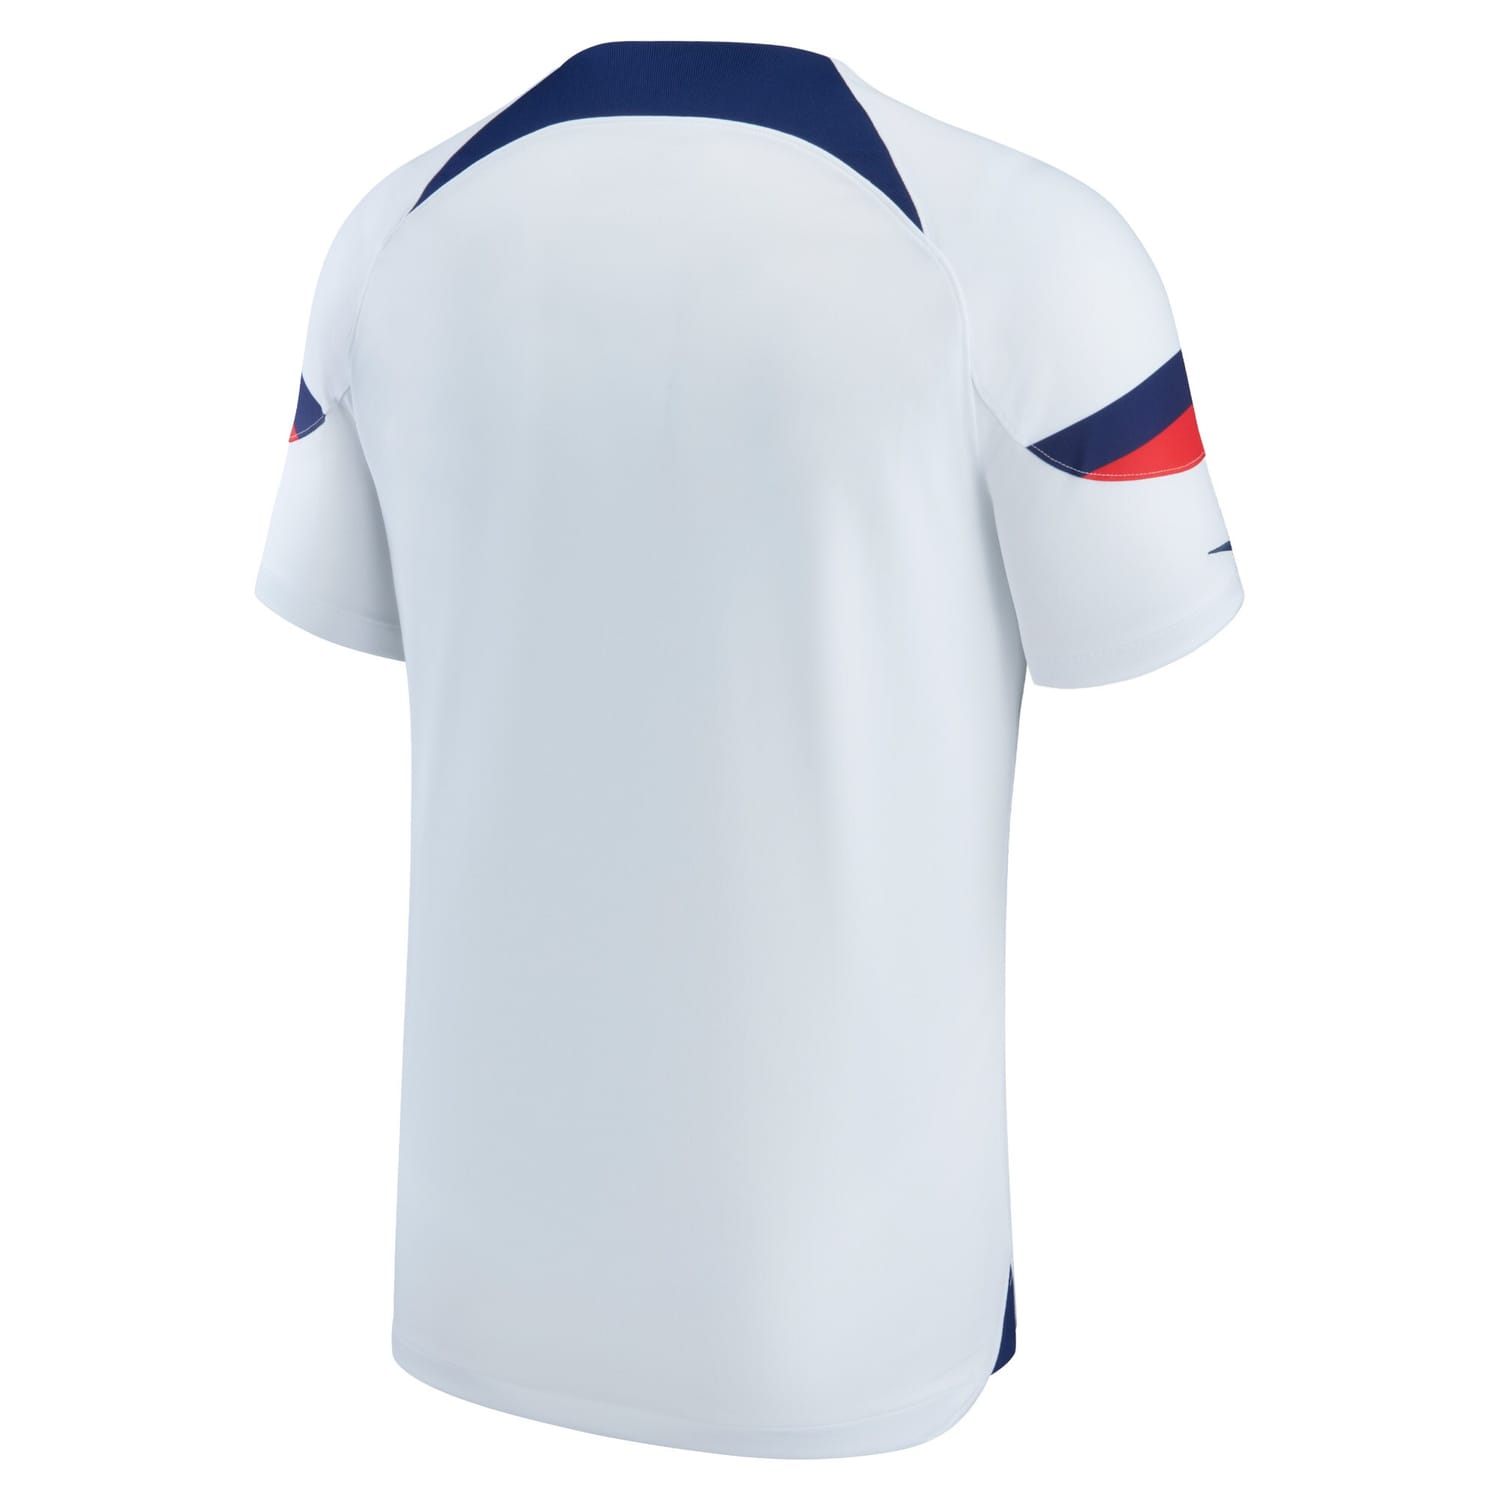 USWNT Home Jersey Shirt White 2022-23 for Men